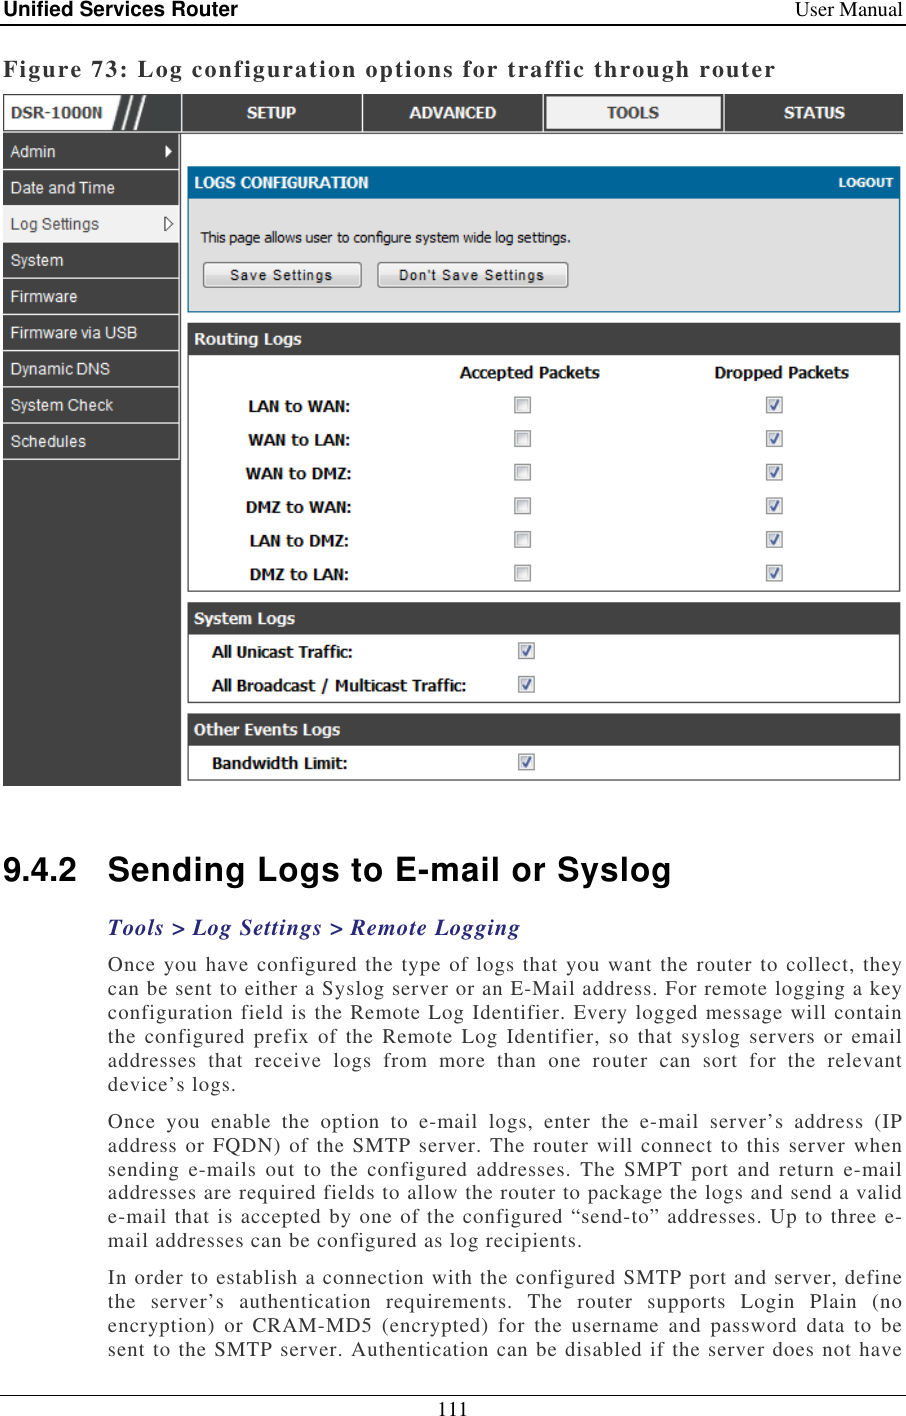 Unified Services Router    User Manual 111  Figure 73: Log configuration options for traffic through router   9.4.2  Sending Logs to E-mail or Syslog Tools &gt; Log Settings &gt; Remote Logging Once you have configured the type of logs that you want the router to collect, they can be sent to either a Syslog server or an E-Mail address. For remote logging a key configuration field is the Remote Log Identifier. Every logged message will contain the  configured prefix  of the Remote  Log  Identifier, so  that  syslog servers or email addresses  that  receive  logs  from  more  than  one  router  can  sort  for  the  relevant device’s logs.  Once  you  enable  the  option  to  e-mail  logs,  enter  the  e-mail  server’s  address  (IP address or FQDN) of the SMTP server. The router will connect to this server when sending  e-mails  out  to  the  configured addresses.  The SMPT  port  and  return  e-mail addresses are required fields to allow the router to package the logs and send a valid e-mail that is accepted by one of the configured “send-to” addresses. Up to three e-mail addresses can be configured as log recipients.  In order to establish a connection with the configured SMTP port and server, define the  server’s  authentication  requirements.  The  router  supports  Login  Plain  (no encryption)  or  CRAM-MD5  (encrypted)  for  the  username  and  password  data  to  be sent to the SMTP server. Authentication can be disabled if the server does not have 